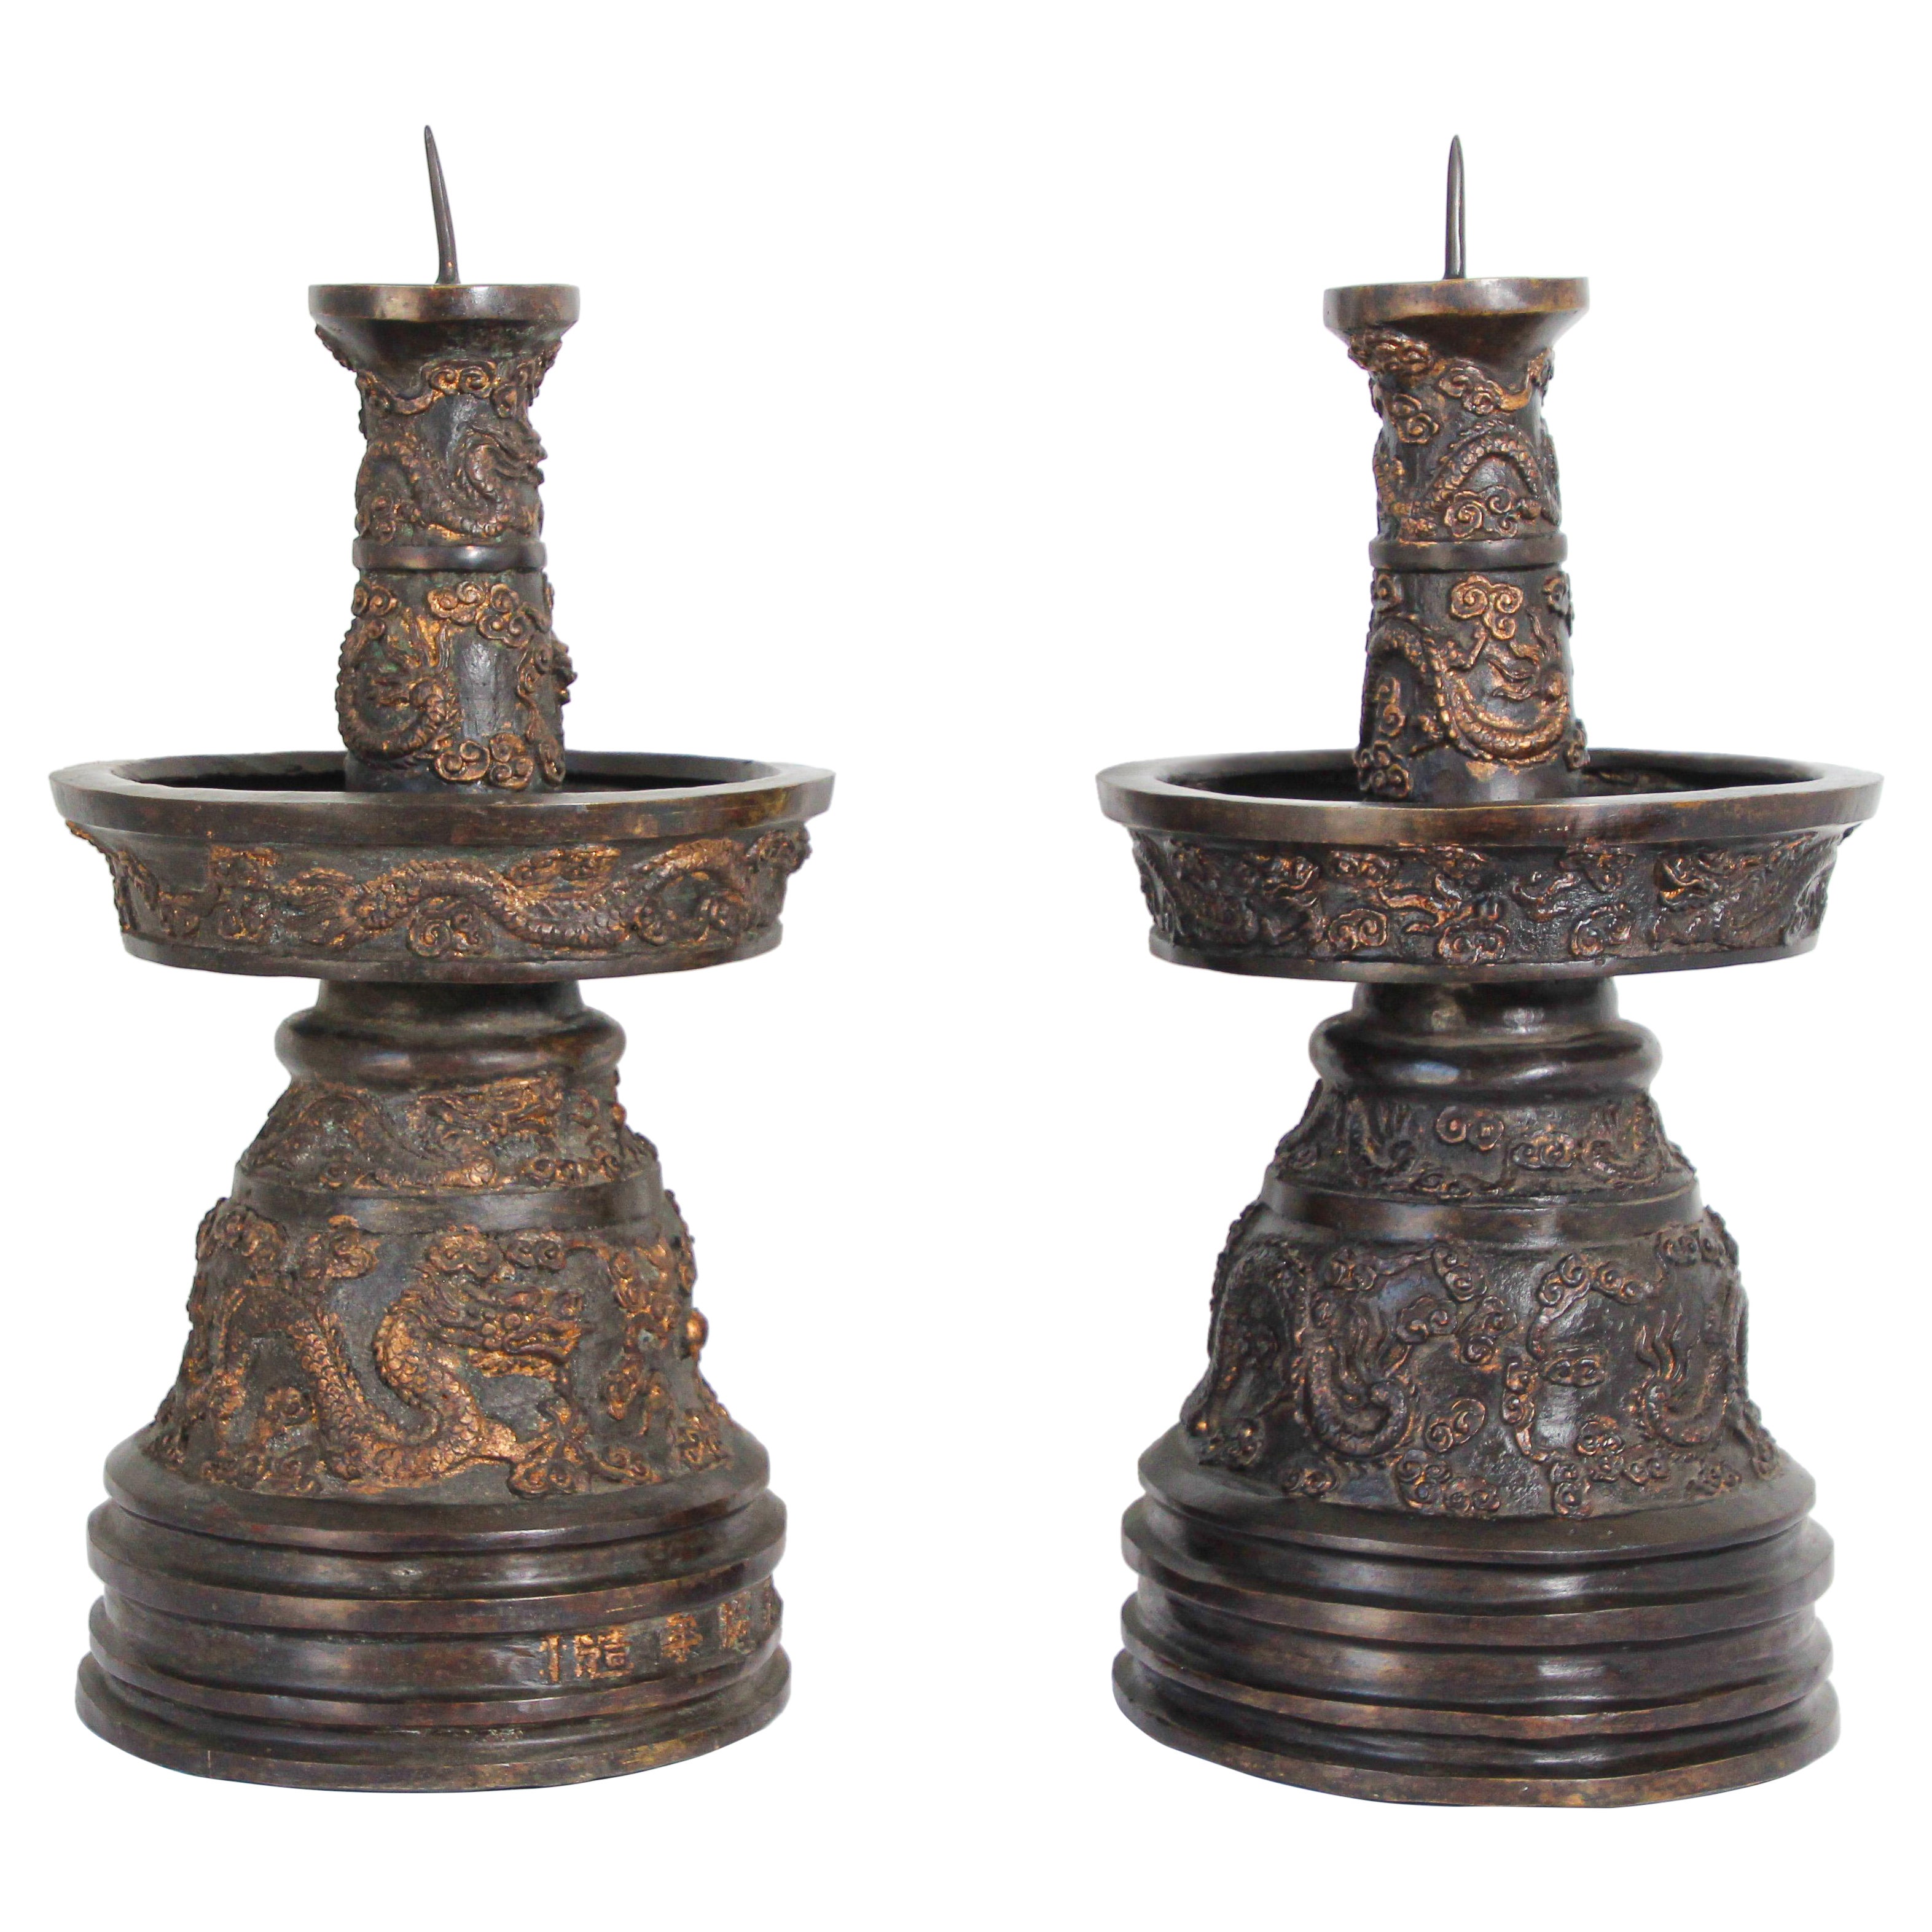 Chinese Bronze Dragons Candlesticks Imperial Style